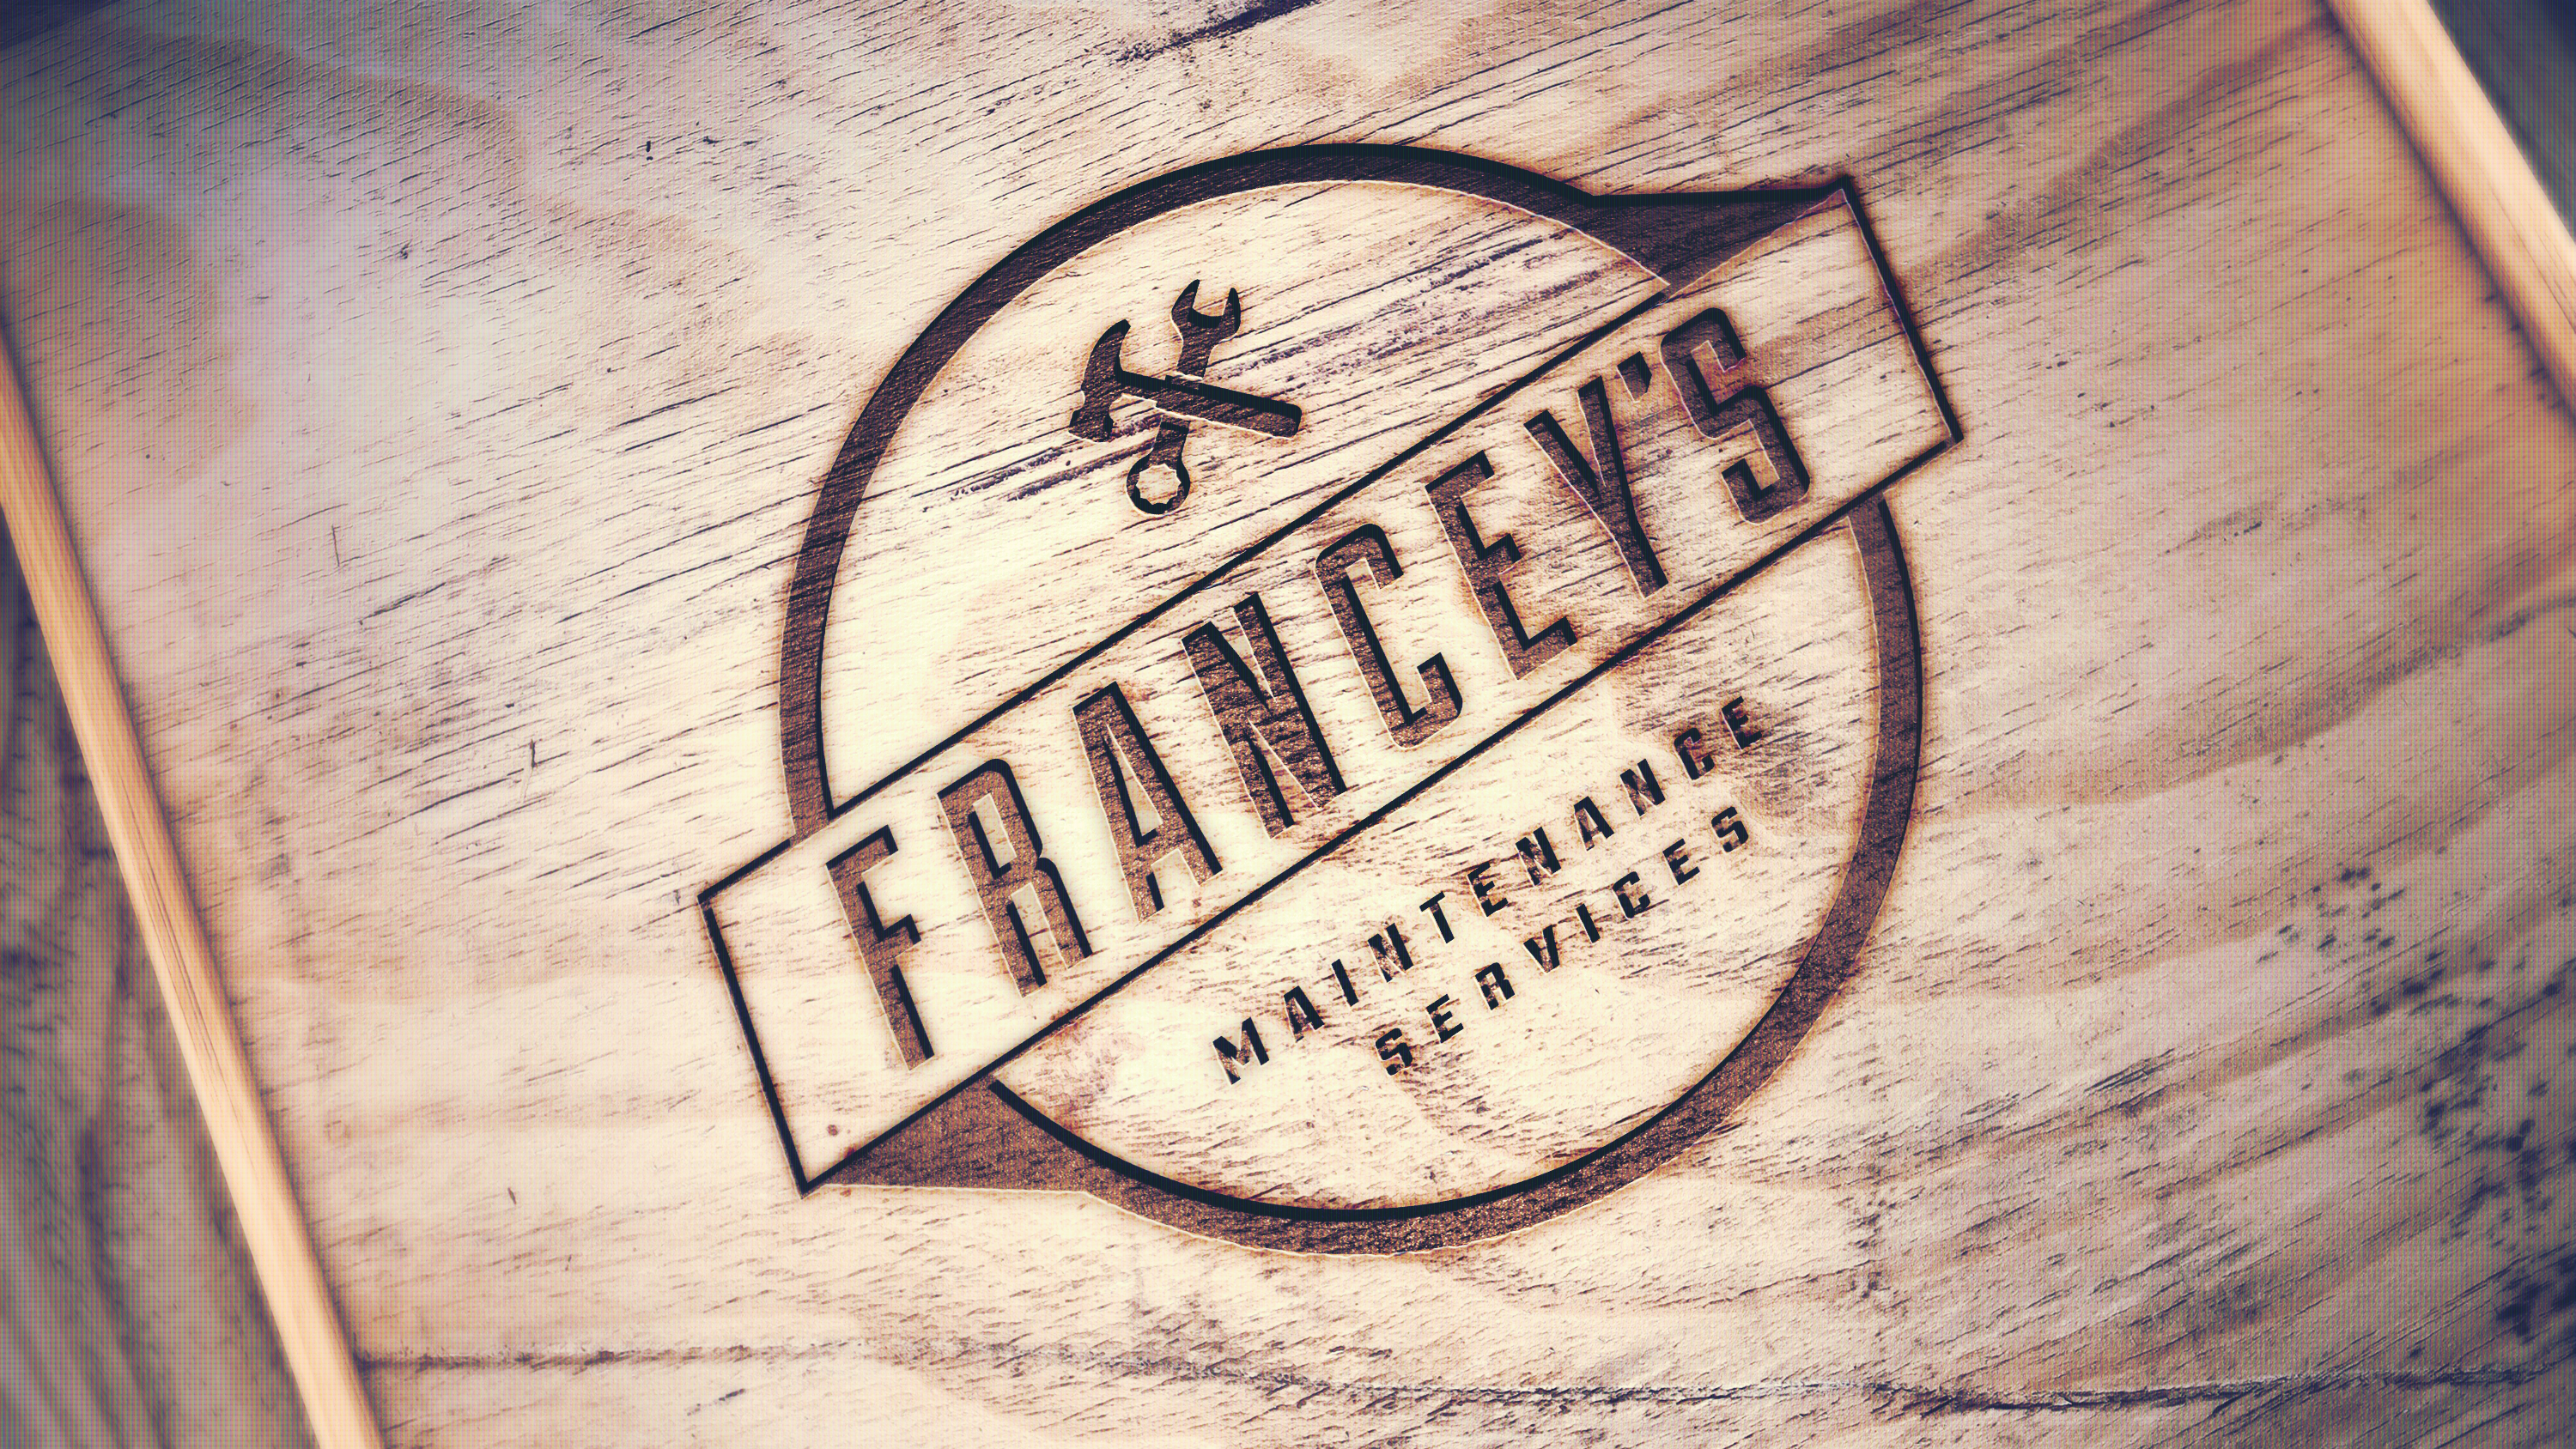 Wood burn of Francey's Maintenance services logo with hammer and spanner